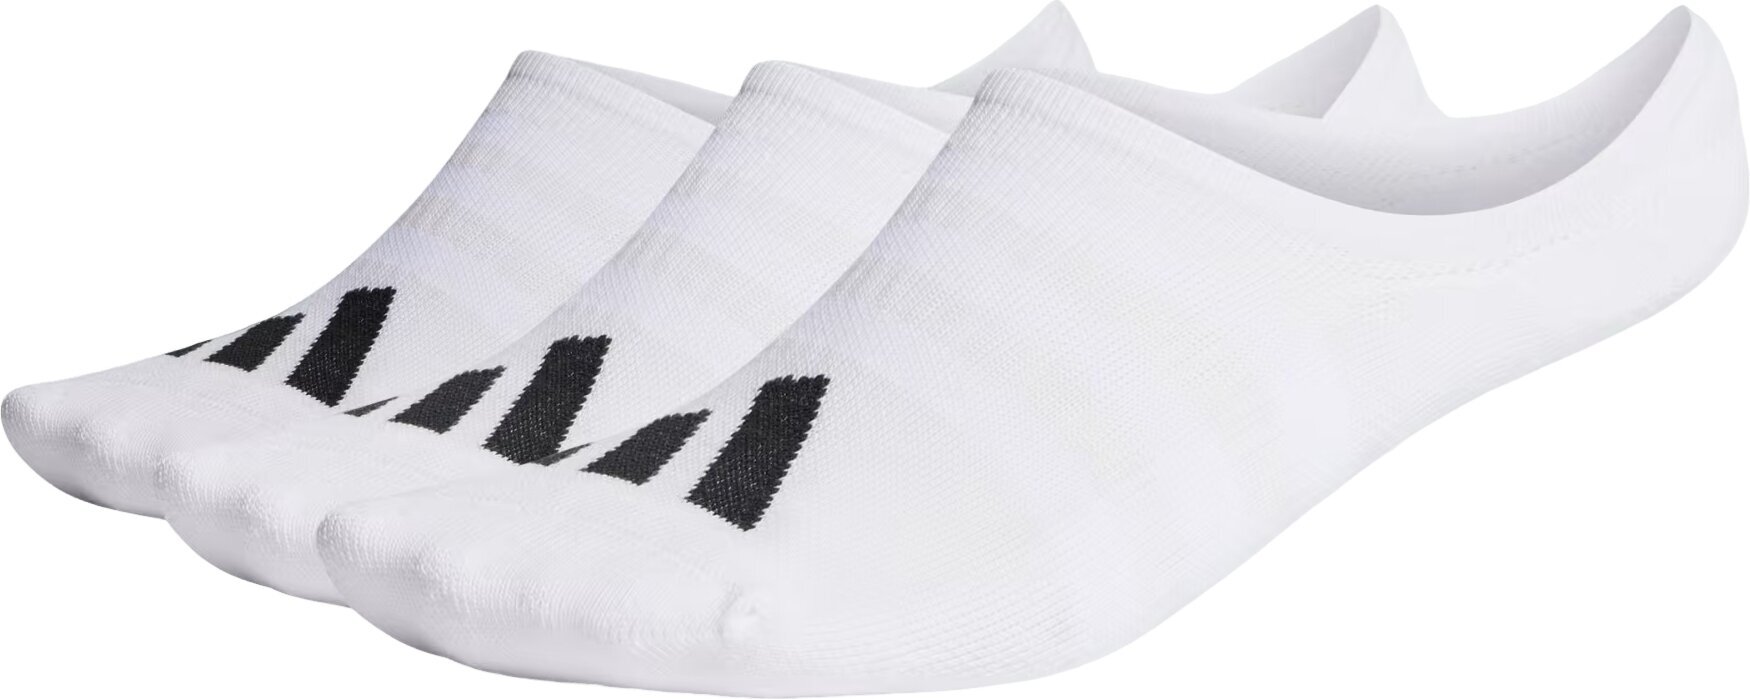 Chaussettes Adidas No Show Golf Socks 3-Pairs Chaussettes White 48-51